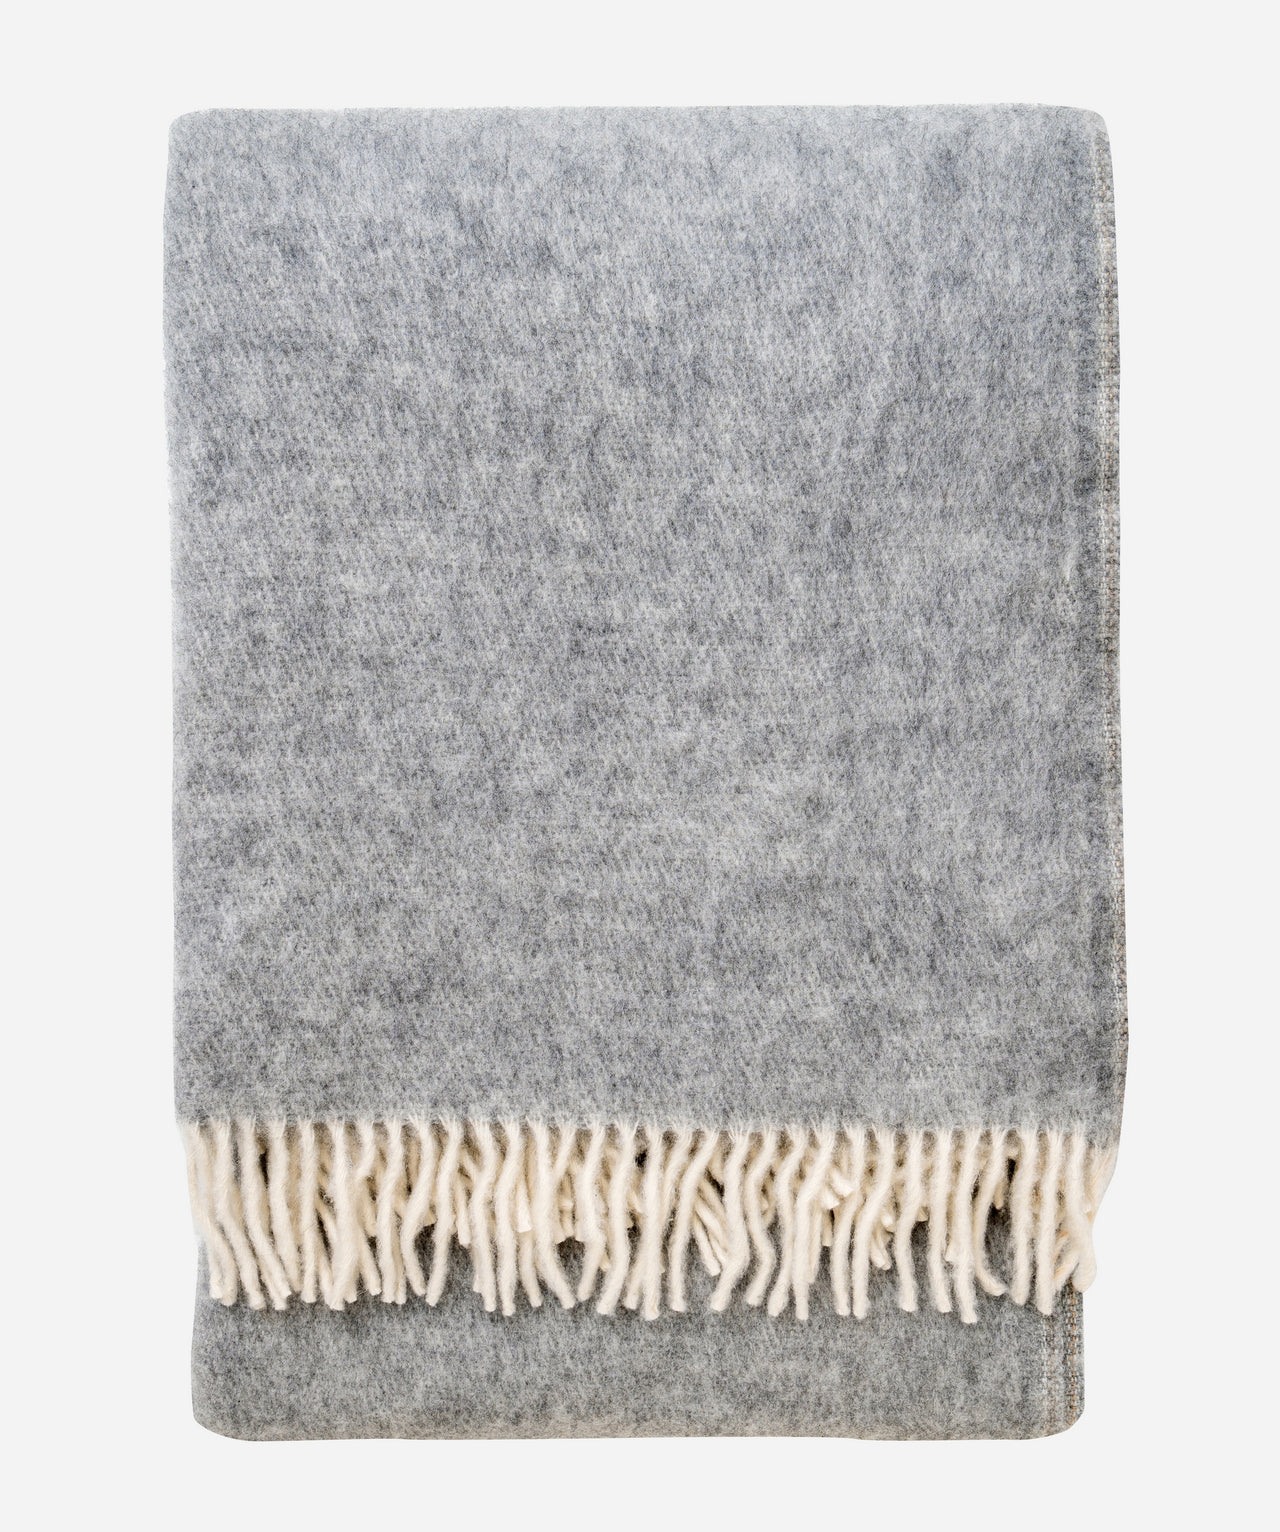 100% Pure Soft Gray Wool Blanket - Heavy & Thick Wool Throw Blanket